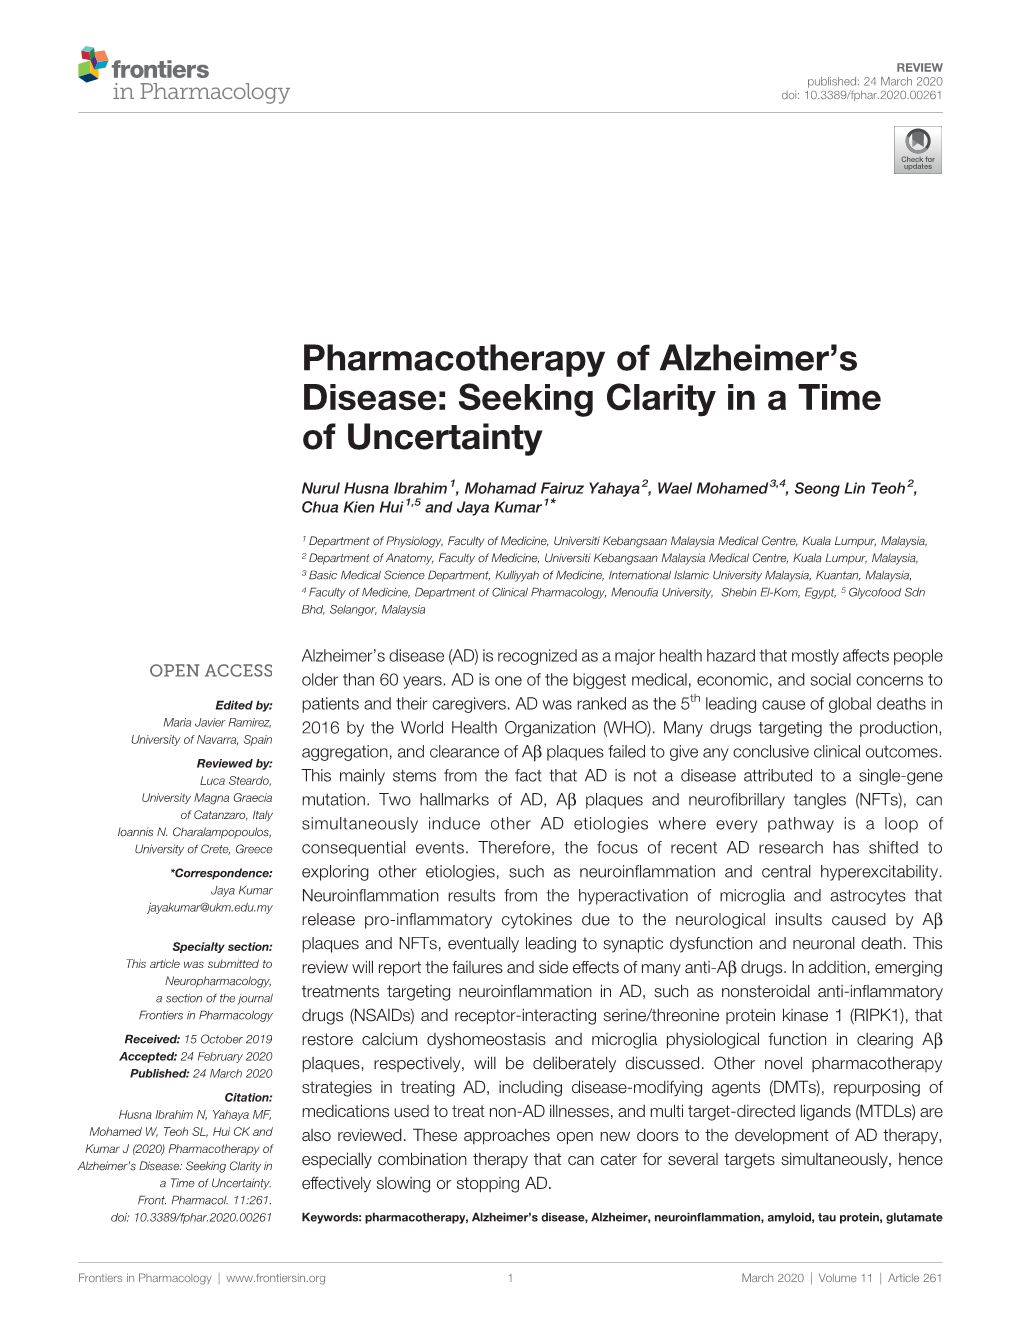 Pharmacotherapy of Alzheimer's Disease